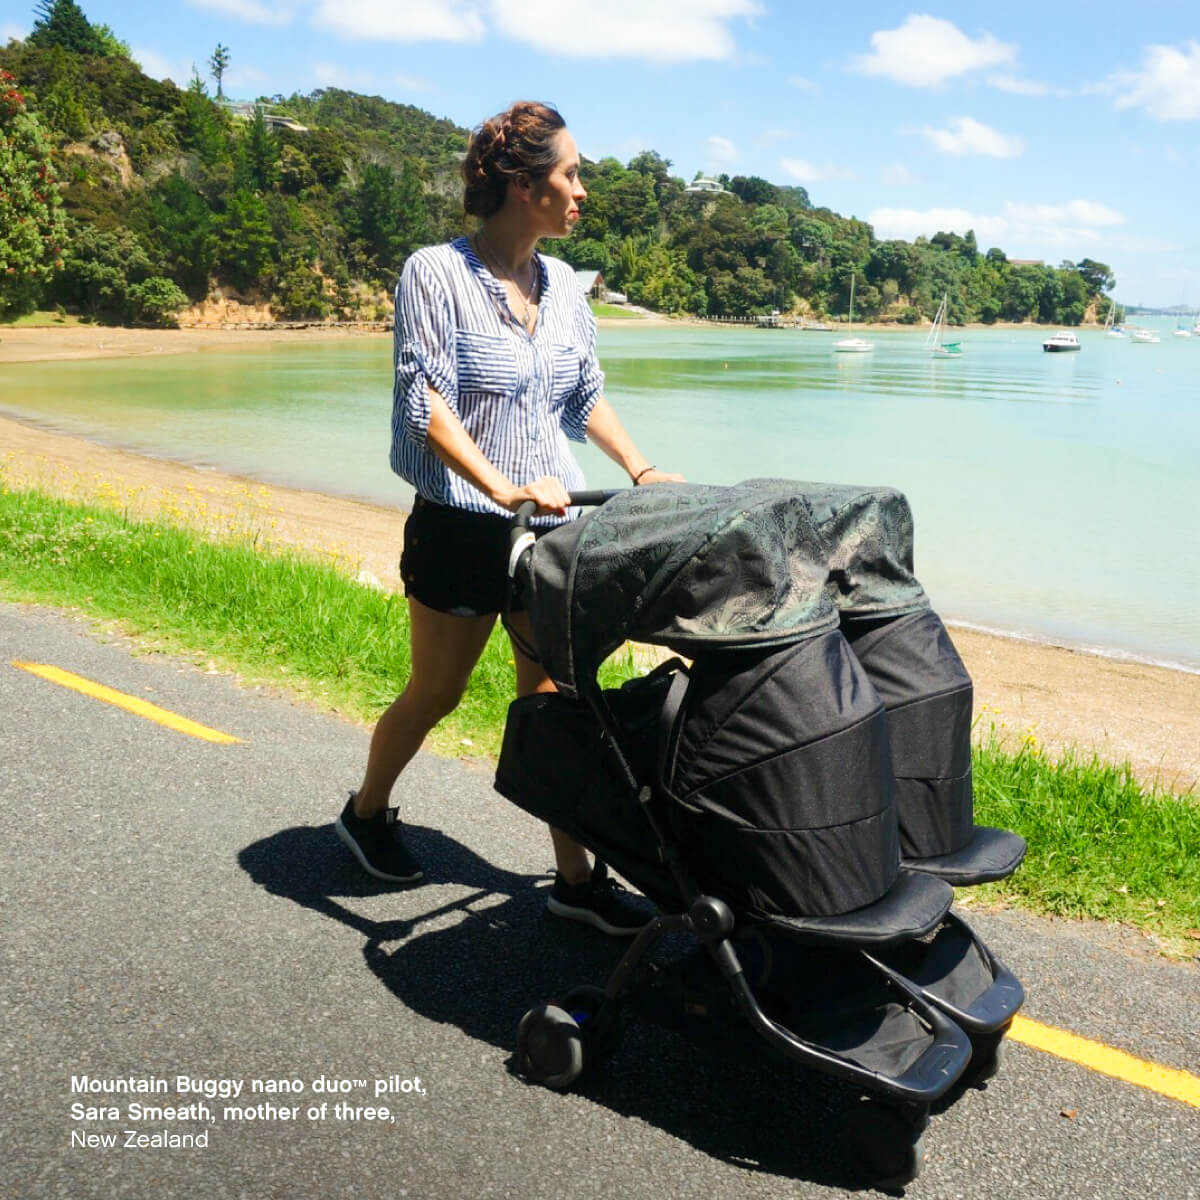 nano duo™ the Perfect Urban Double Buggy for the City